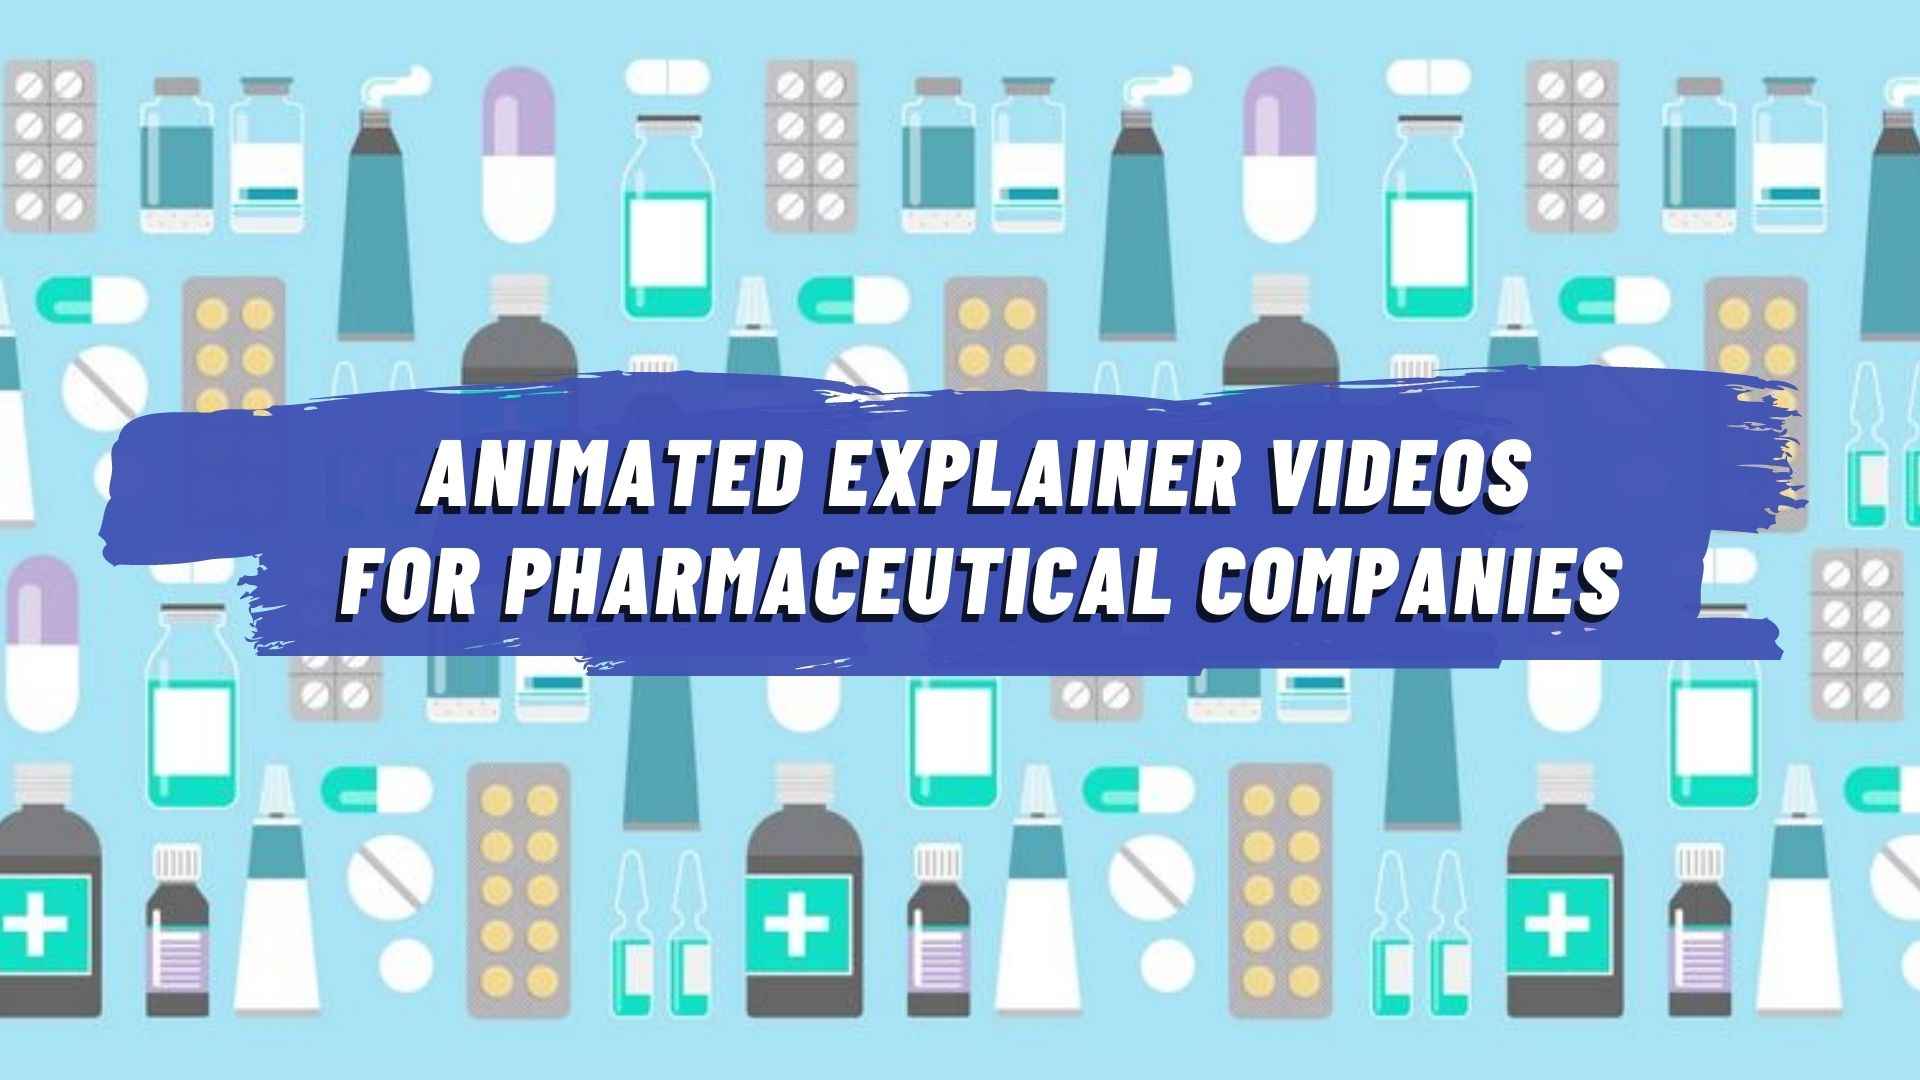 Animated explainer videos for pharmaceutical companies